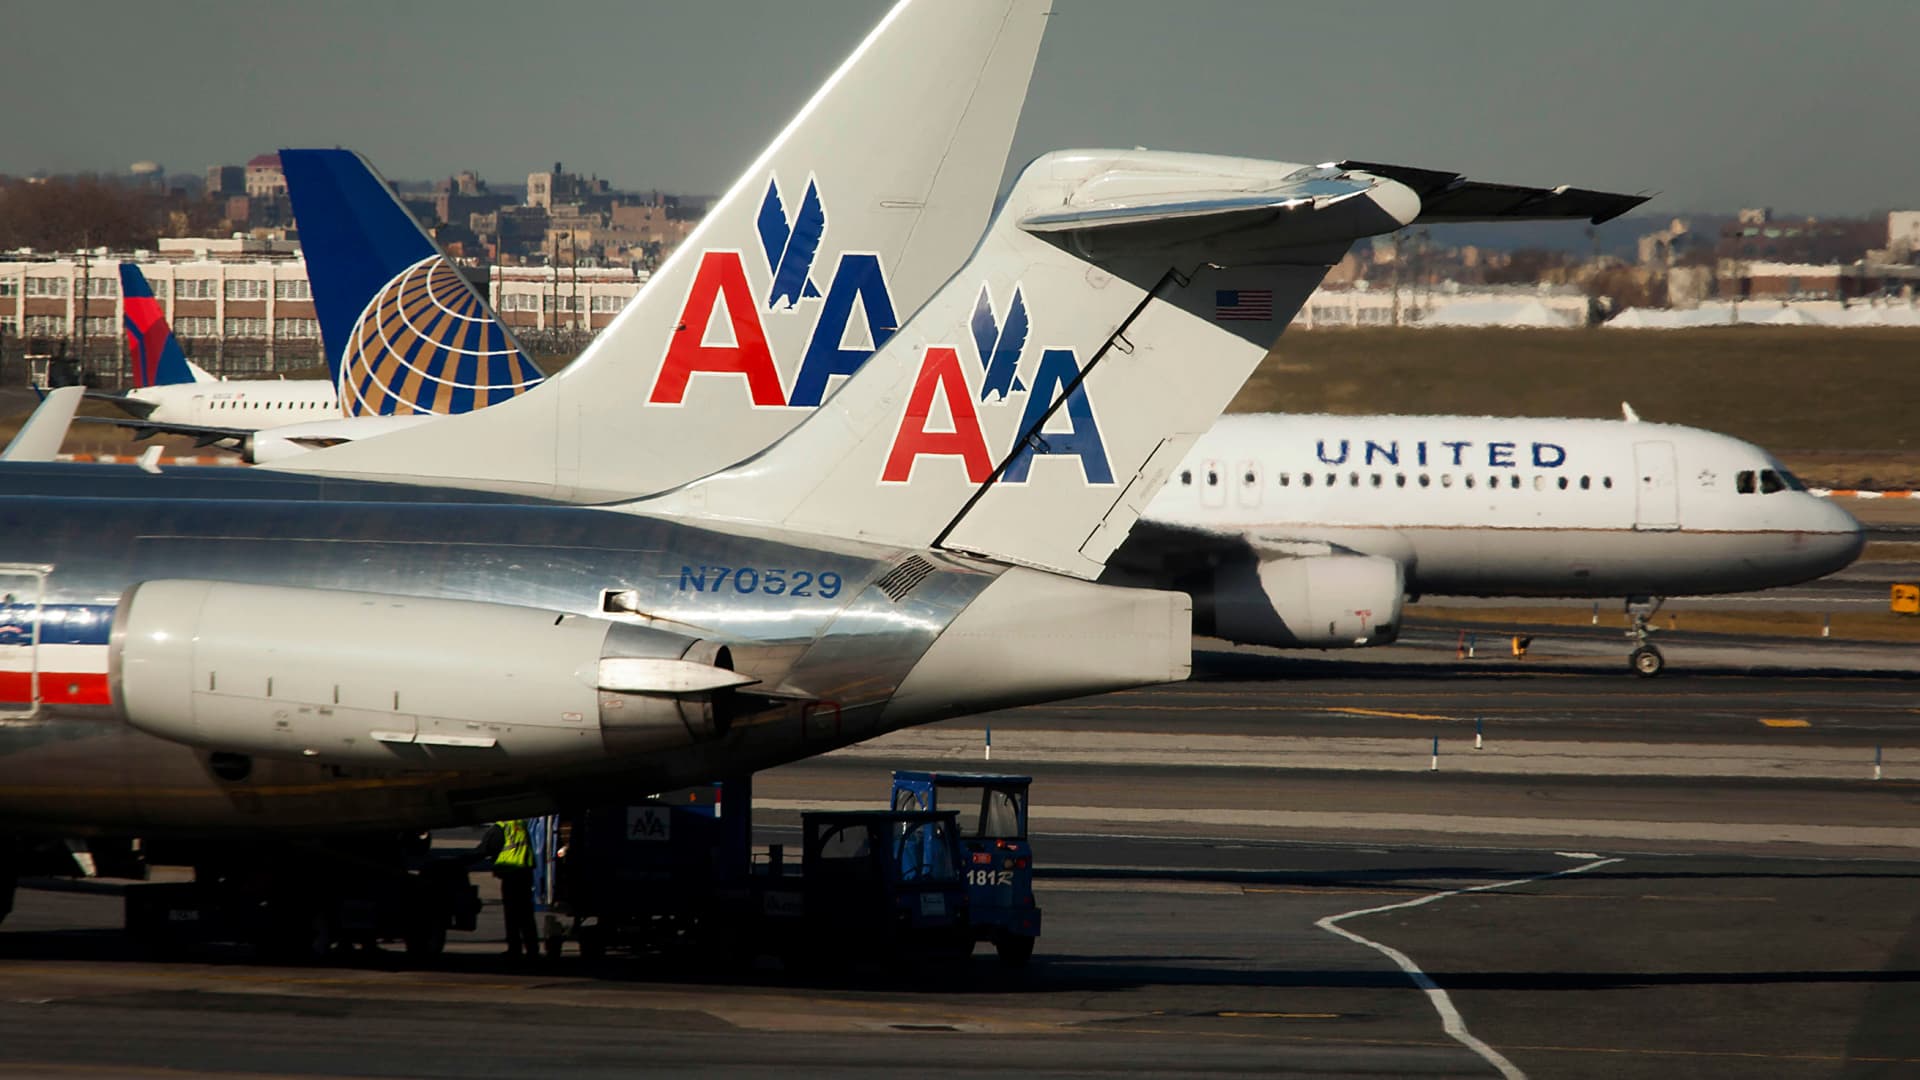 An American Airlines Inc. McDonnell Douglas MD-82 plane sits parked at a gate while a United Continental Holdings plane taxis down the runway at LaGuardia Airport in the Queens borough of New York.